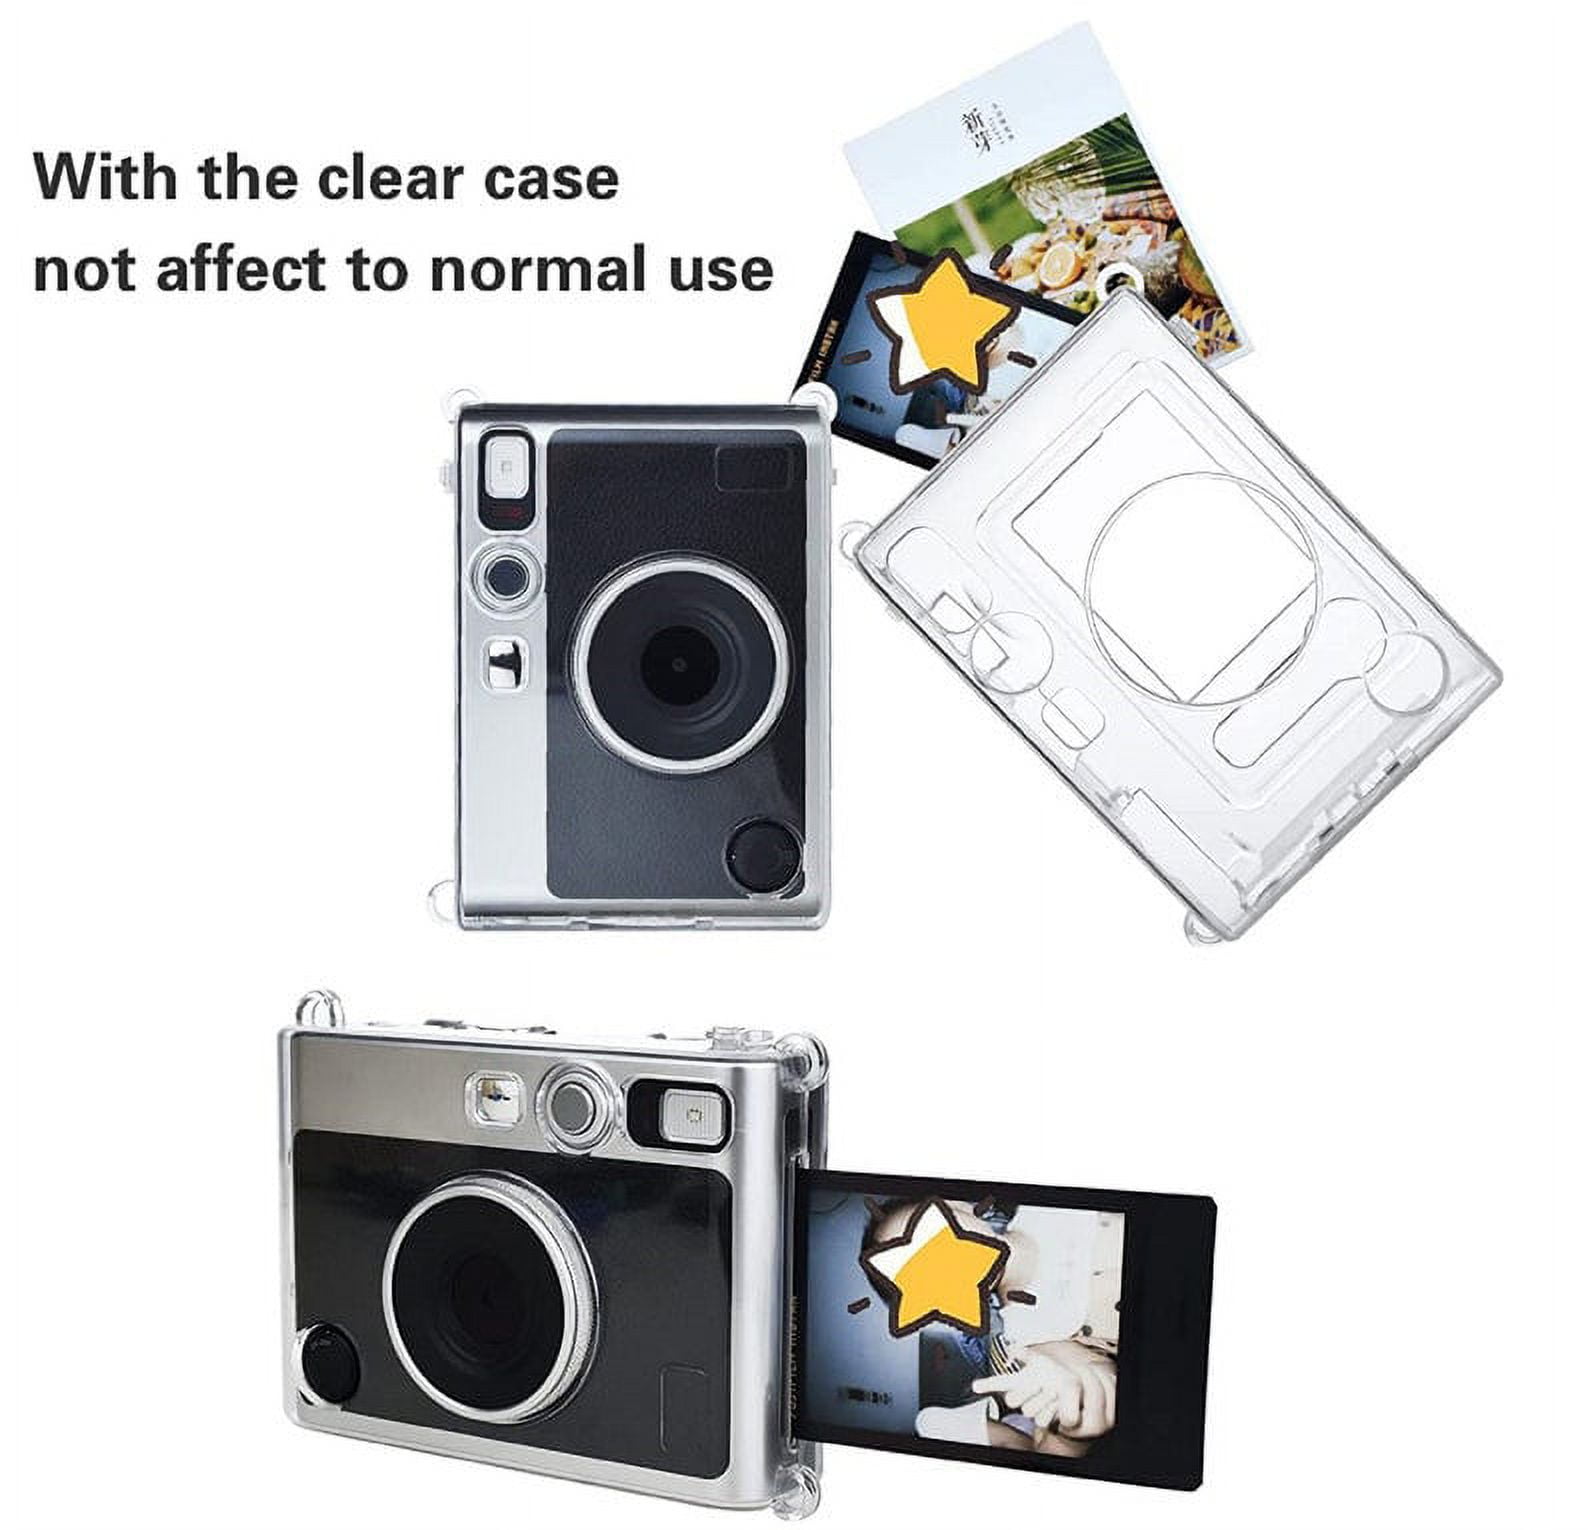 Rieibi Clear Protective Case for Fujifilm Instax Mini Evo Instant Camera -  Hard Carrying Case Cover with Shoulder Strap